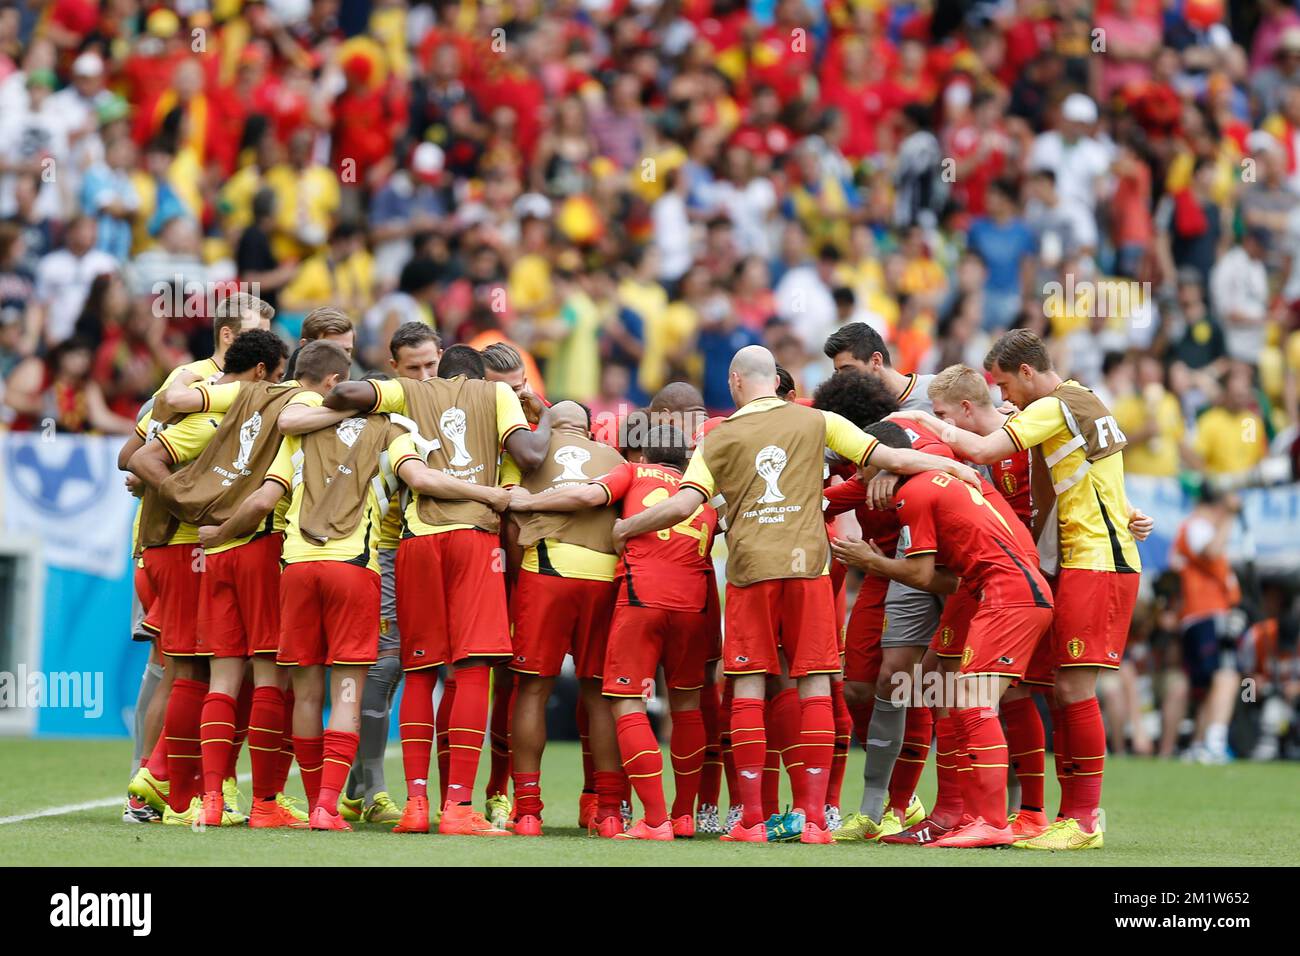 20140622 - RIO DE JANEIRO, BRAZIL: Red Devils players pictured as a team at before a soccer game between Belgian national team The Red Devils and Russia in Rio de Janeiro, Brazil, the second game in Group H of the first round of the 2014 FIFA World Cup, Sunday 22 June 2014. BELGA PHOTO BRUNO FAHY Stock Photo